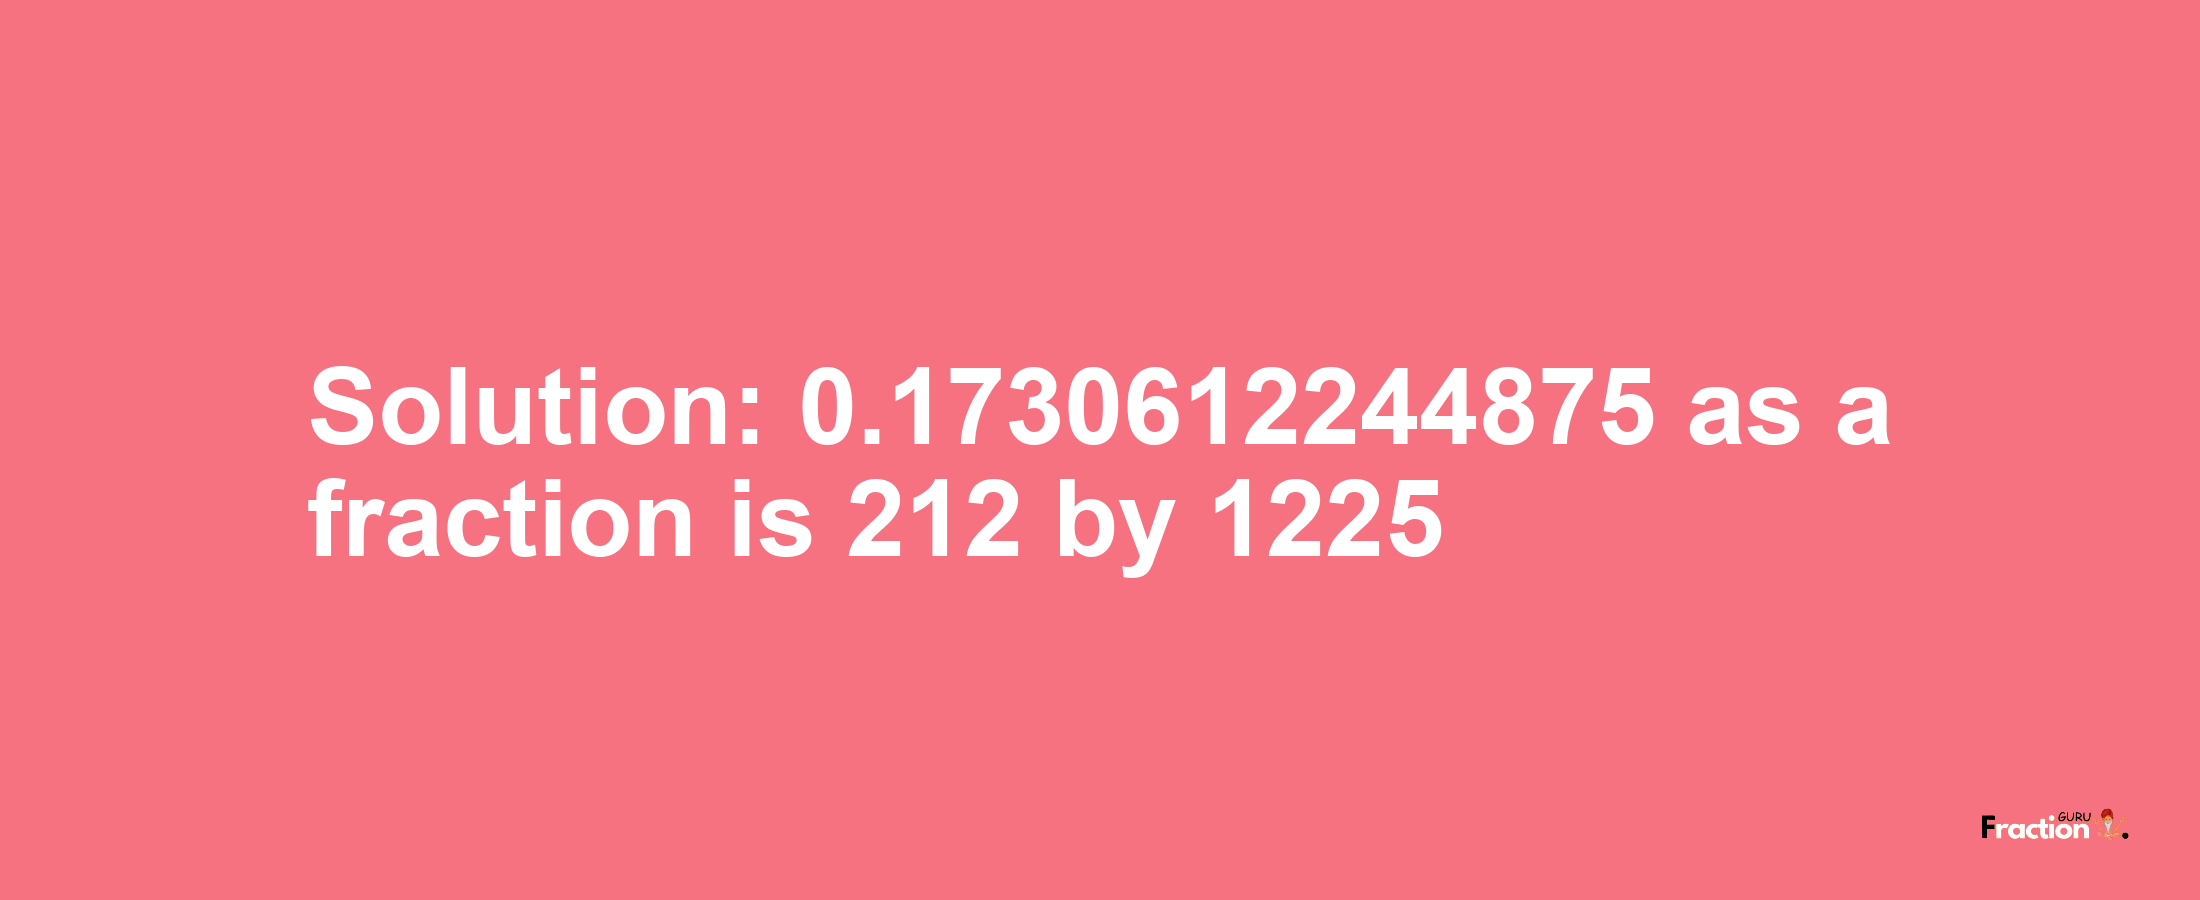 Solution:0.1730612244875 as a fraction is 212/1225